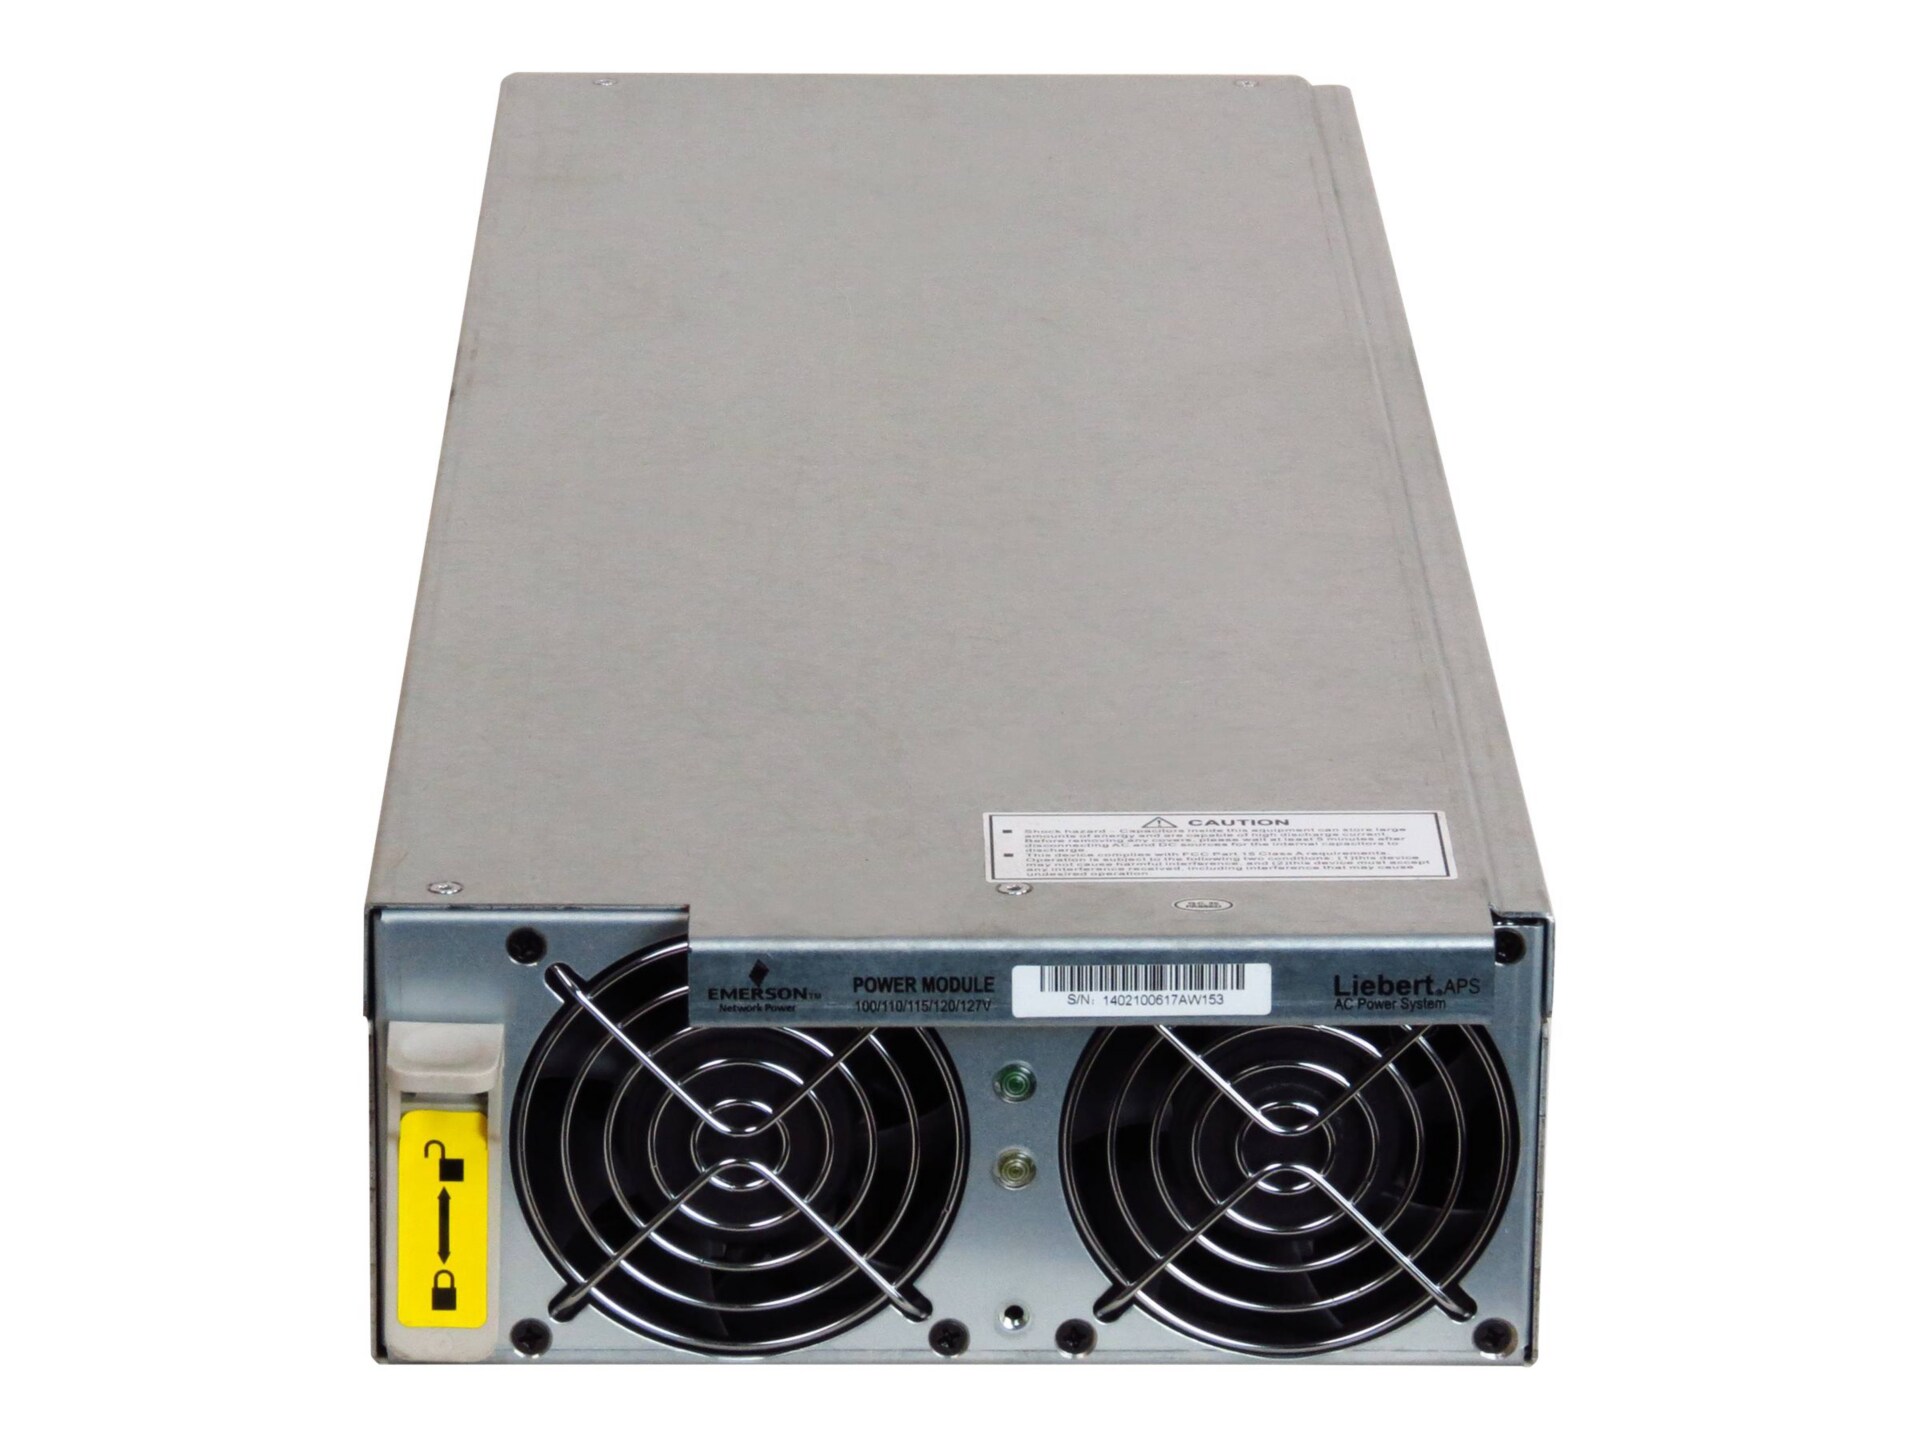 Liebert Vertiv 5kVA 208/120V Power Module for AS5 and AS6 Series APS System